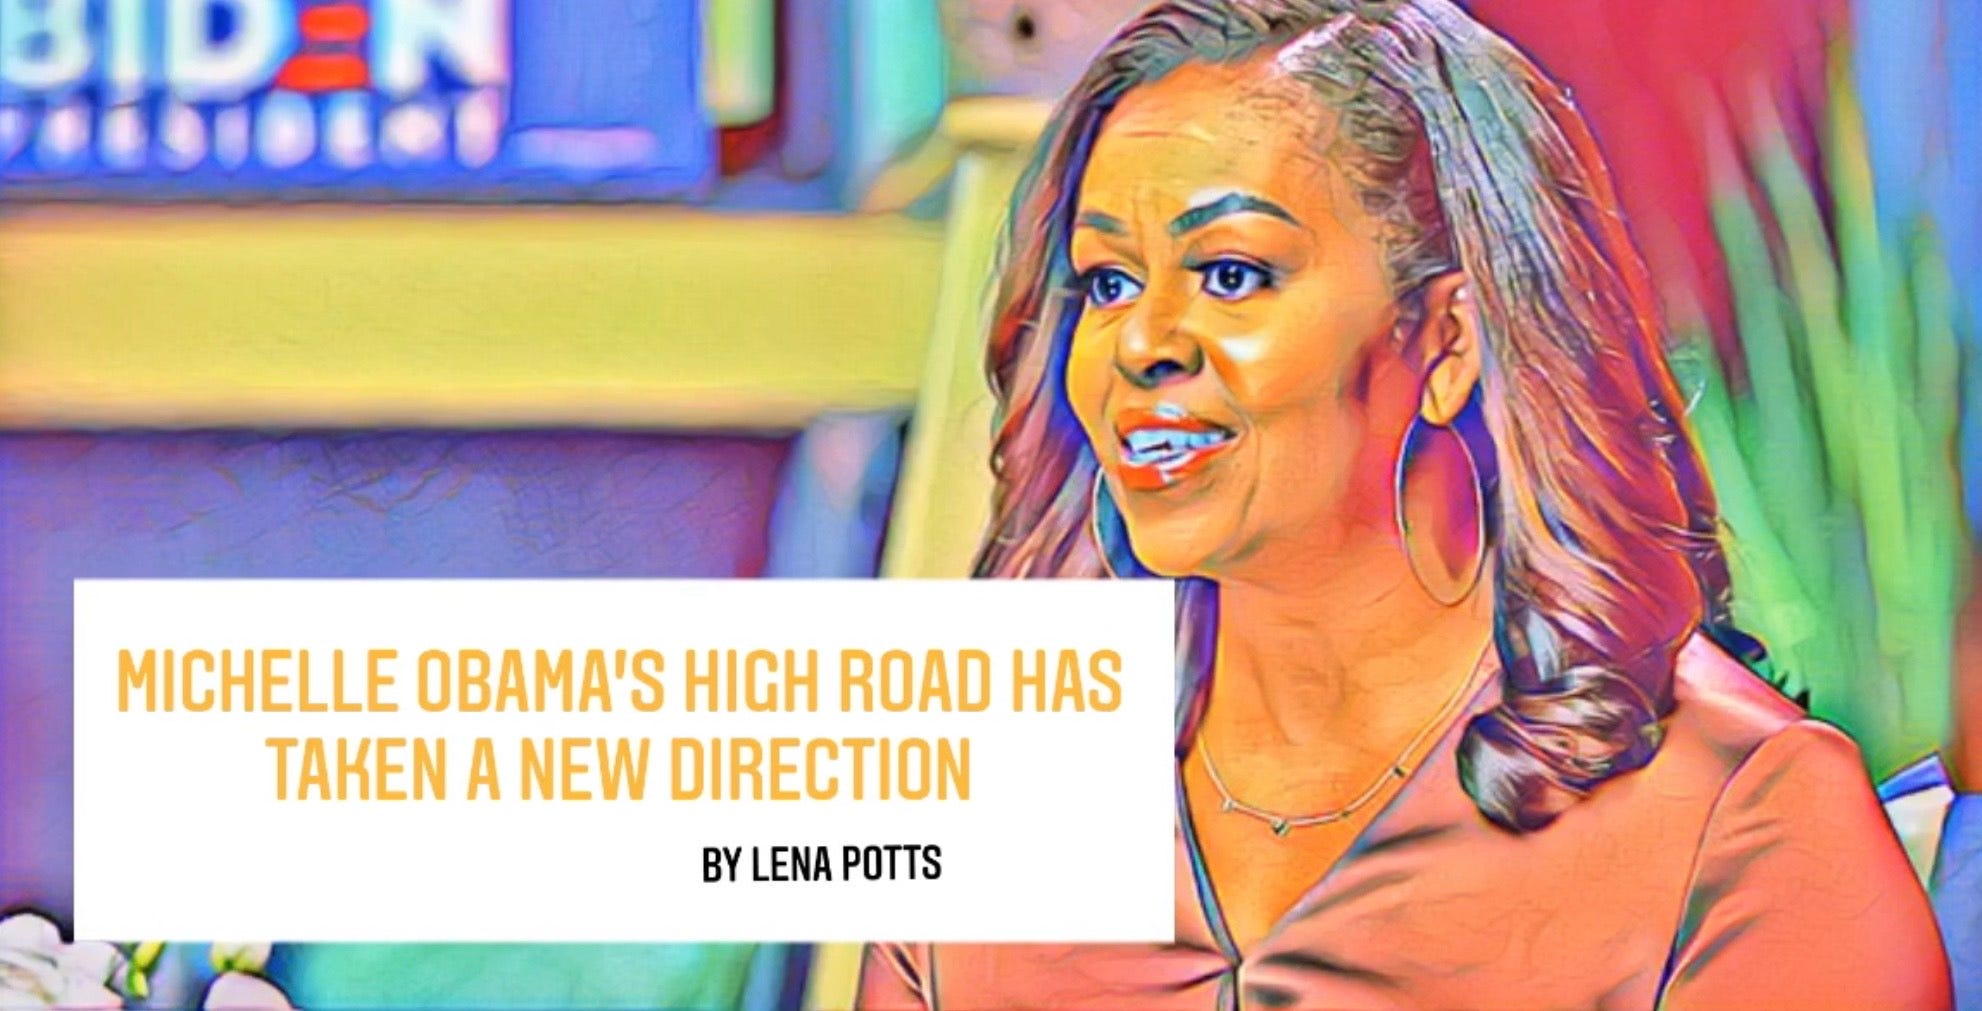 Michelle Obamas high road has taken a new direction by Lena Potts tartmag Medium